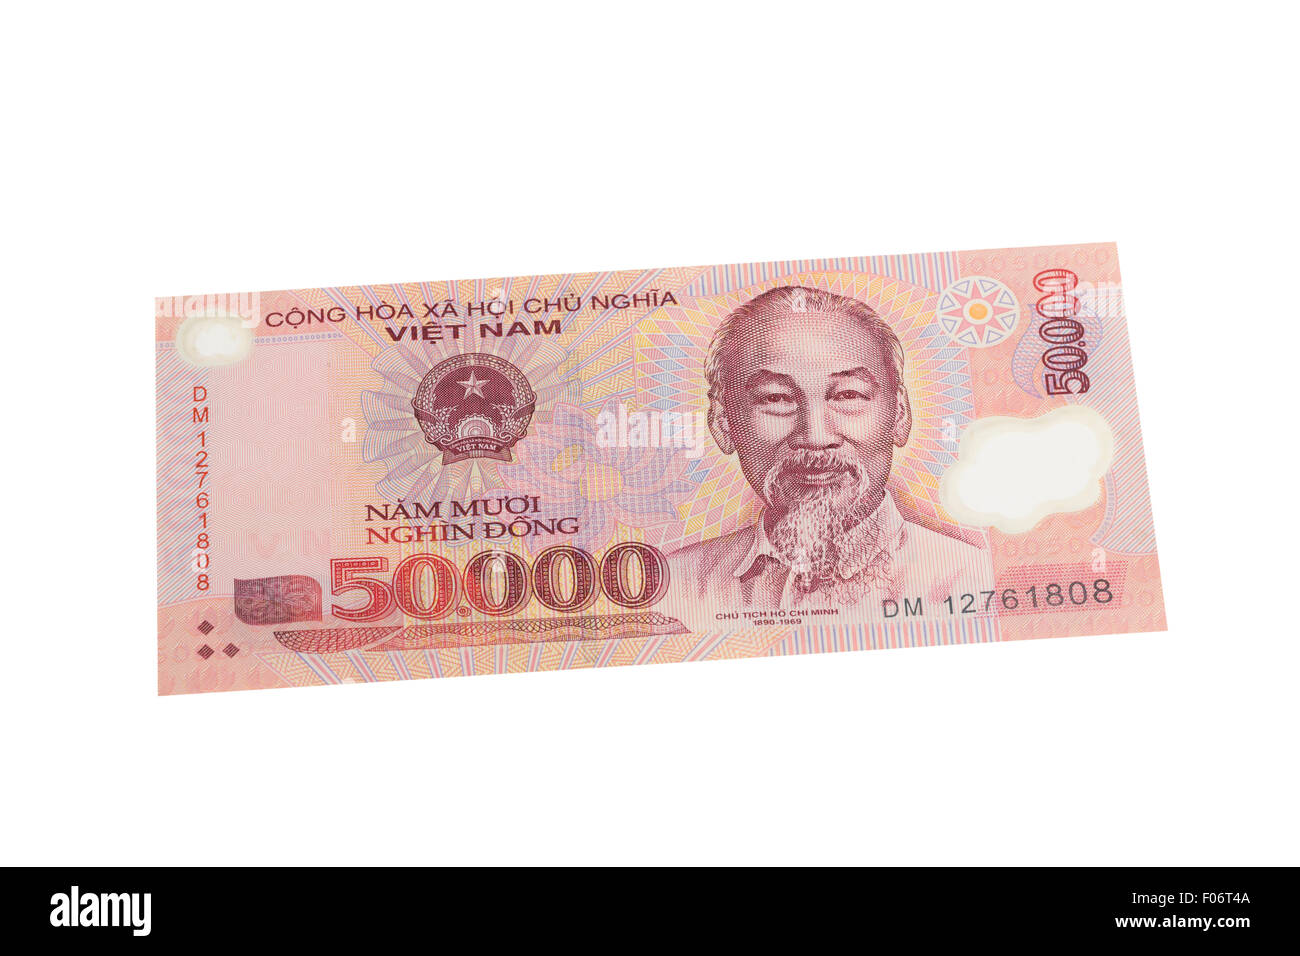 Myr to vietnam currency 300000960000 VND